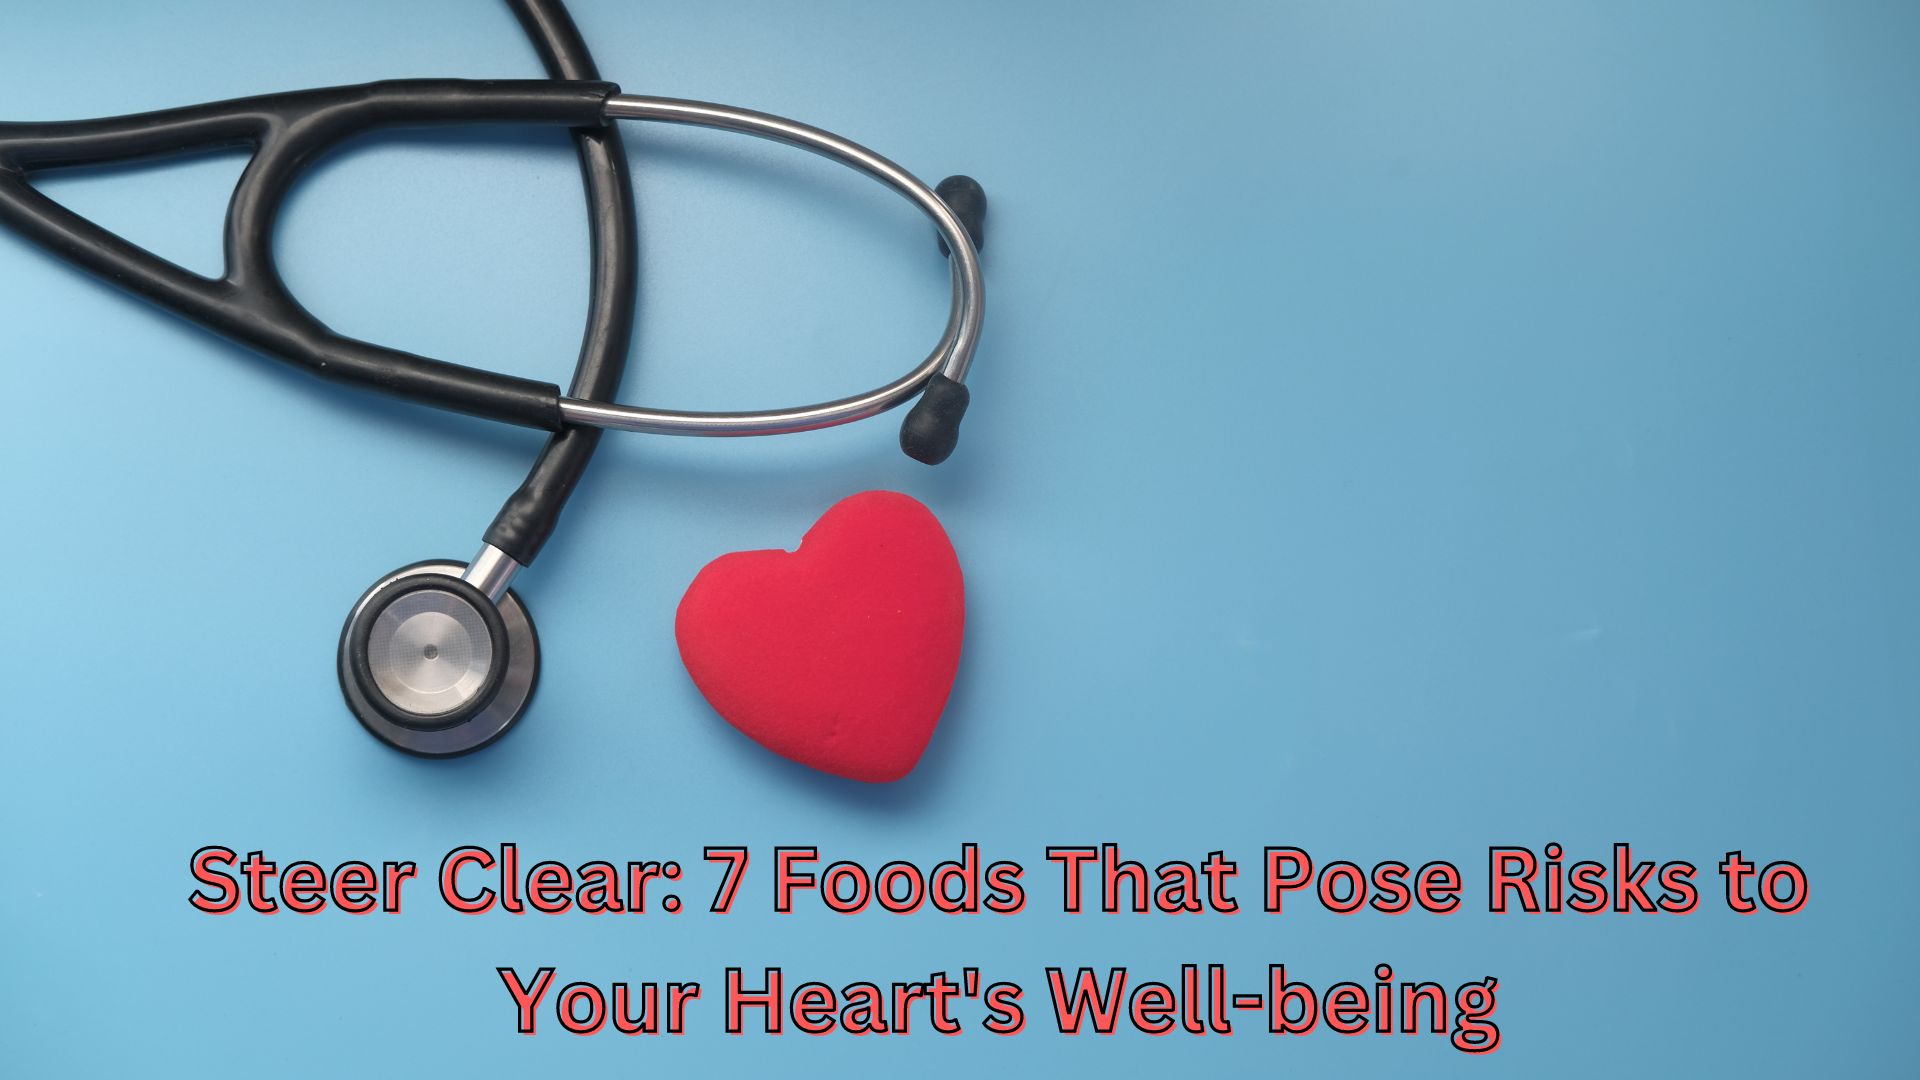 Steer Clear: 7 Foods That Pose Risks to Your Heart's Well-being